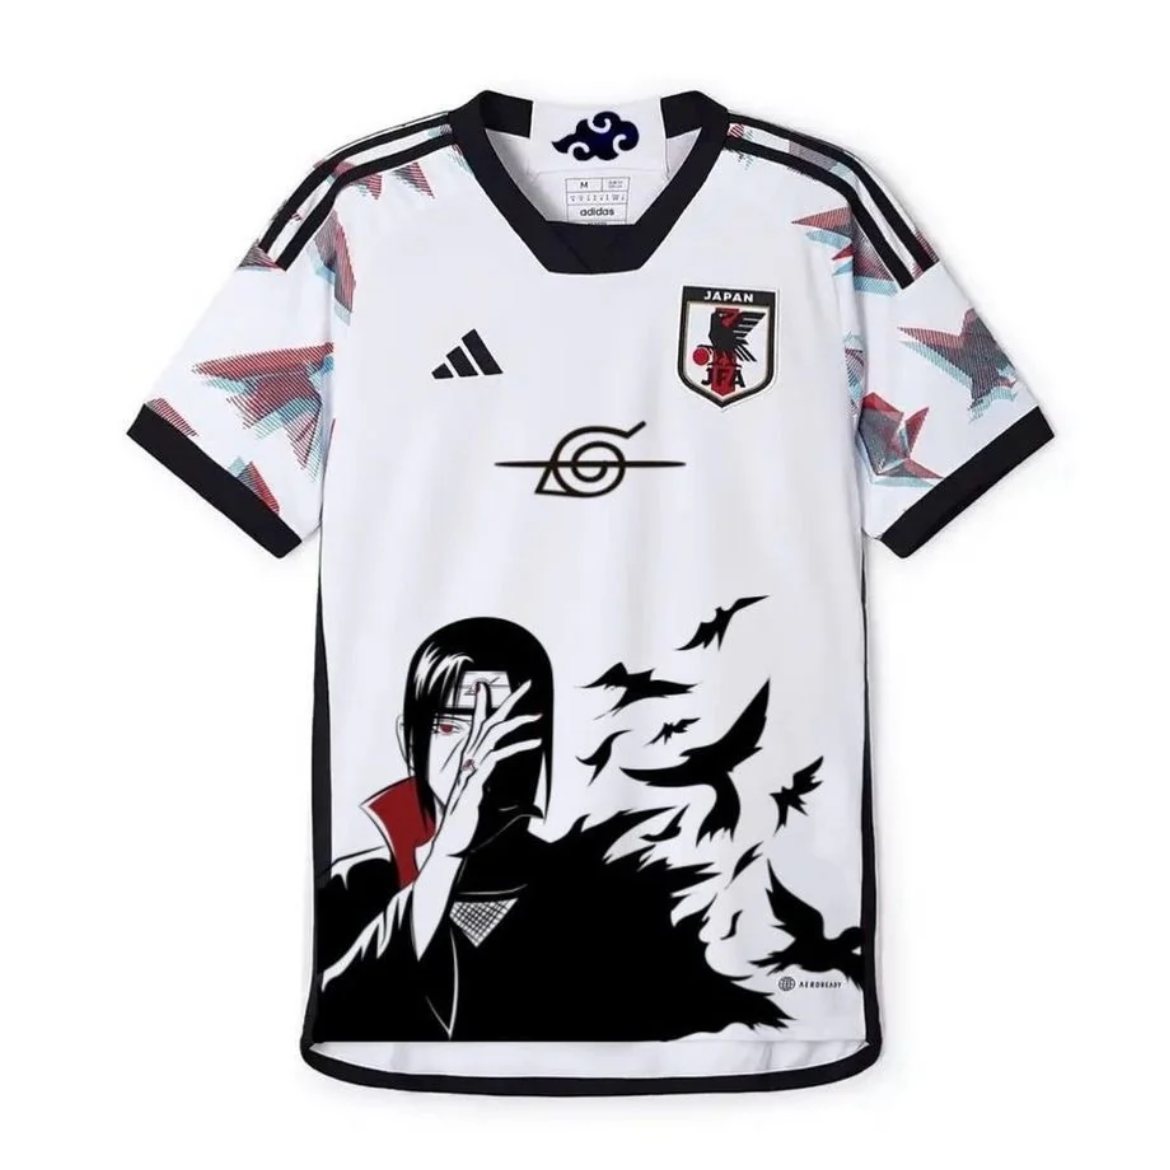 23/24 Itachi x Japan Special Edition Jersey